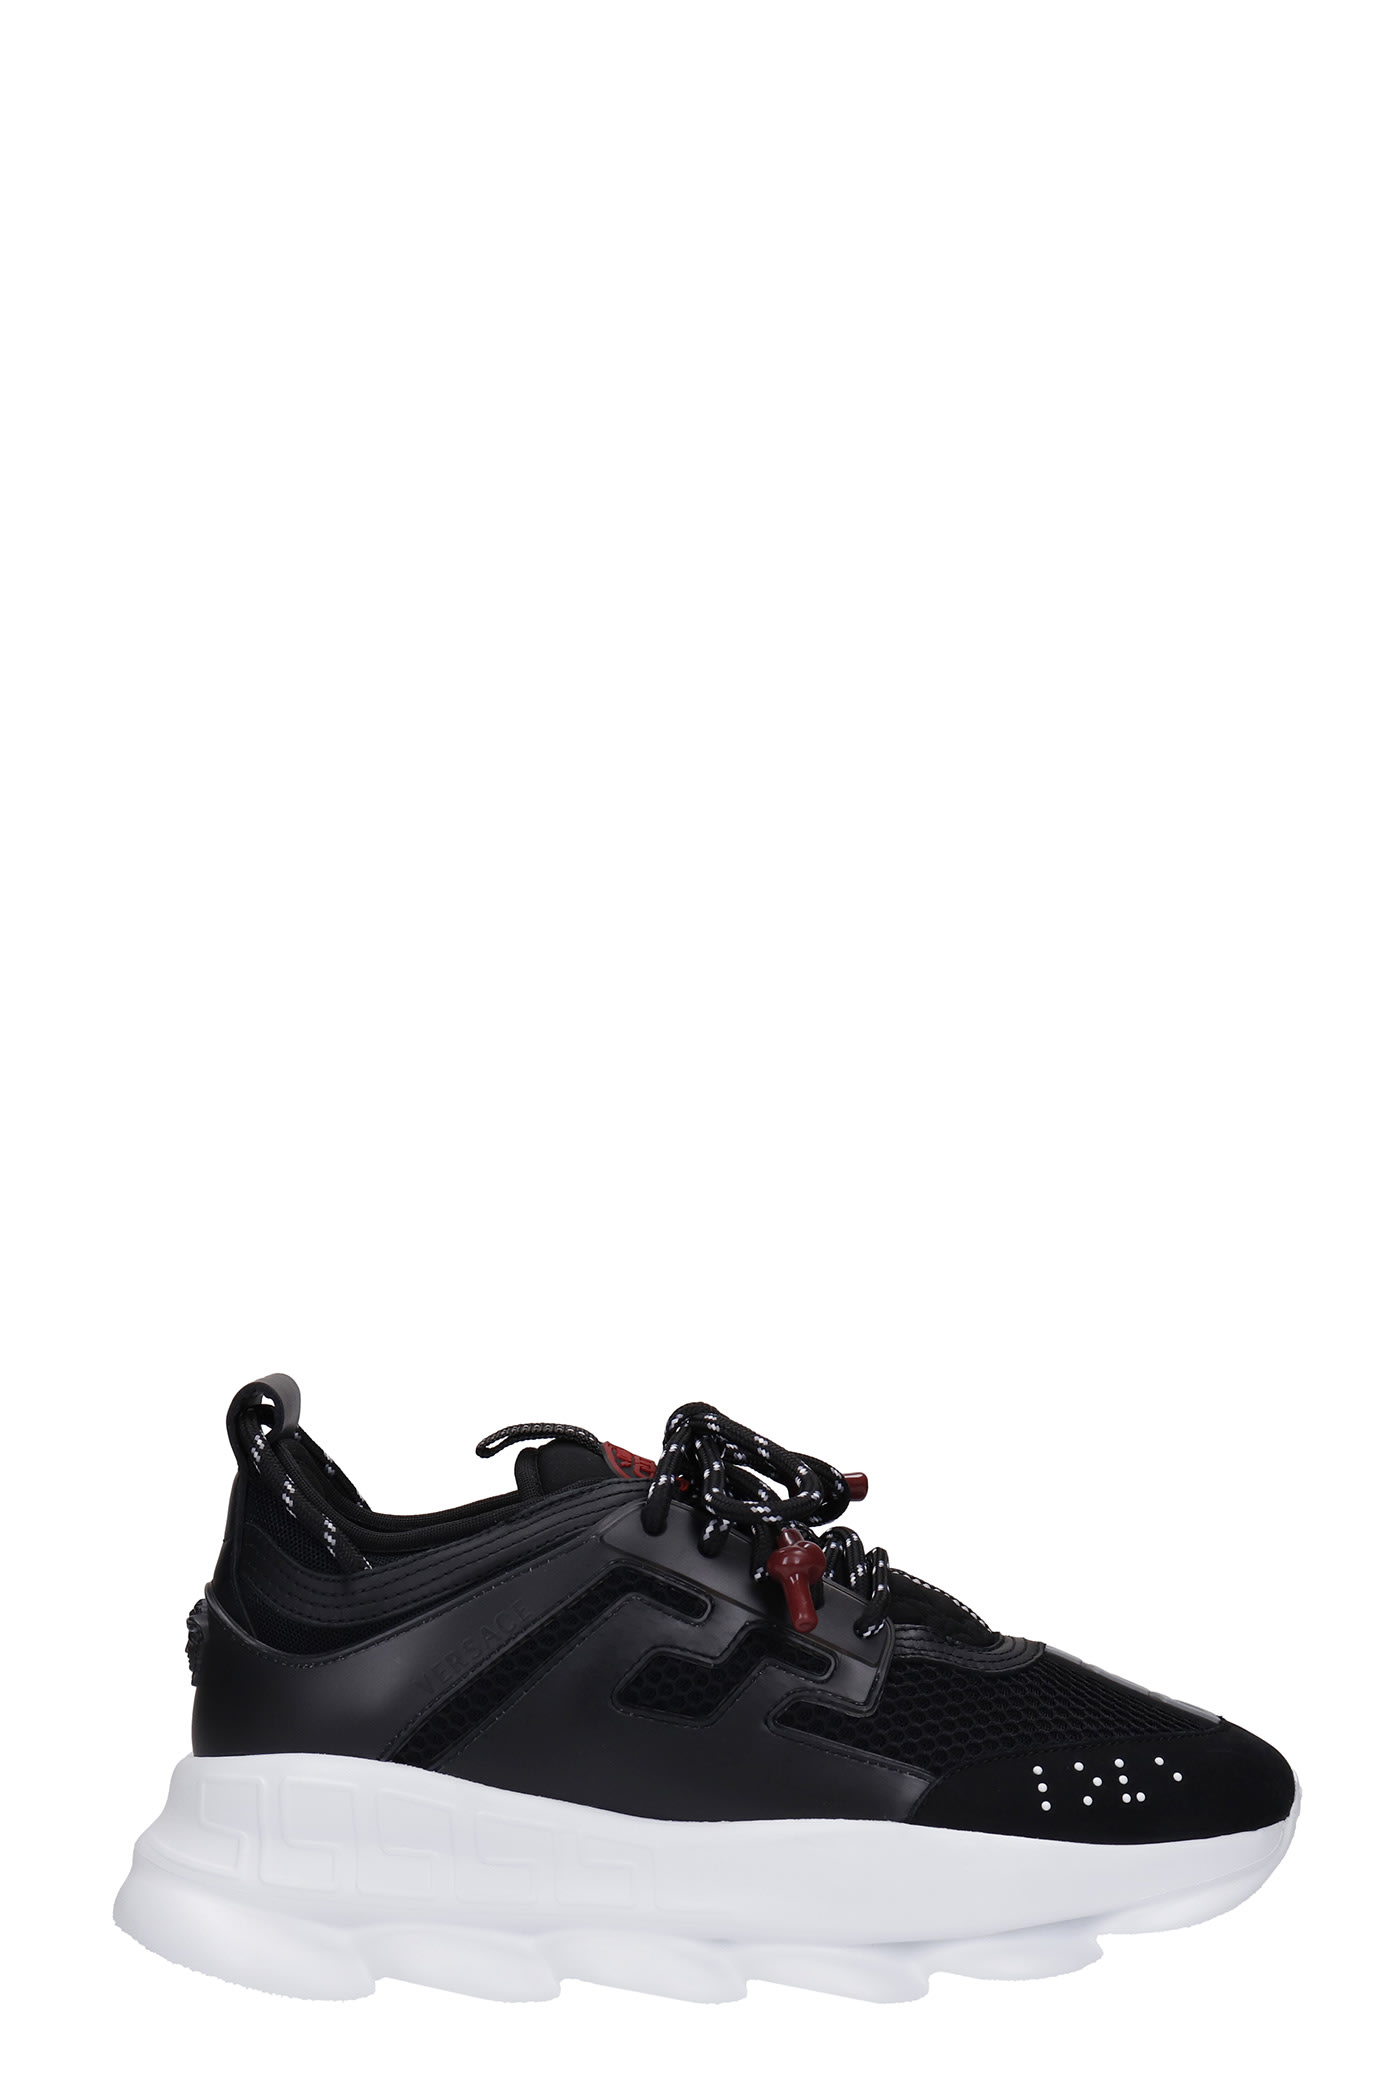 Versace Chain Reaction Sneakers In Black Suede And Leather